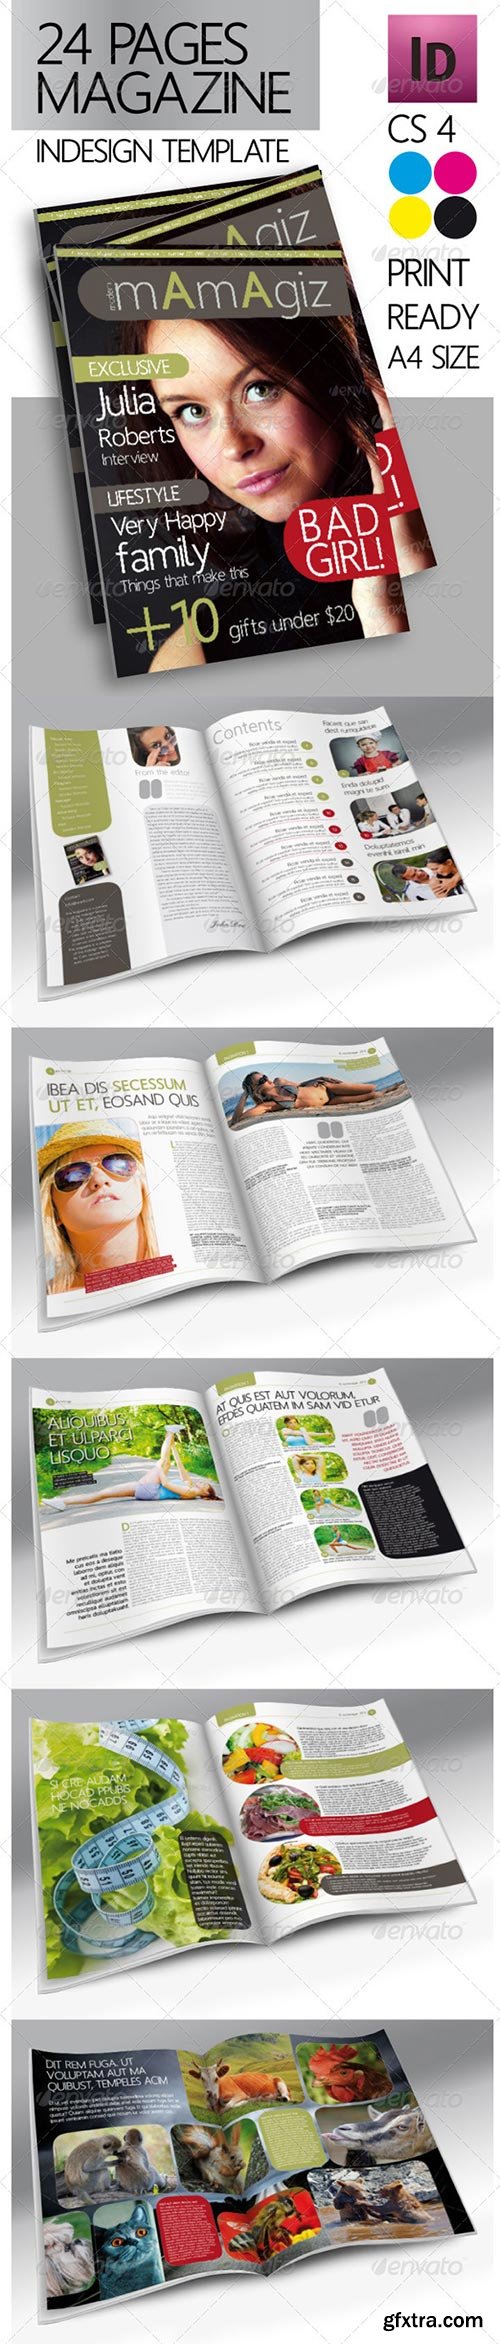 GraphicRiver - 24 Pages Modern Magazine InDesign Template